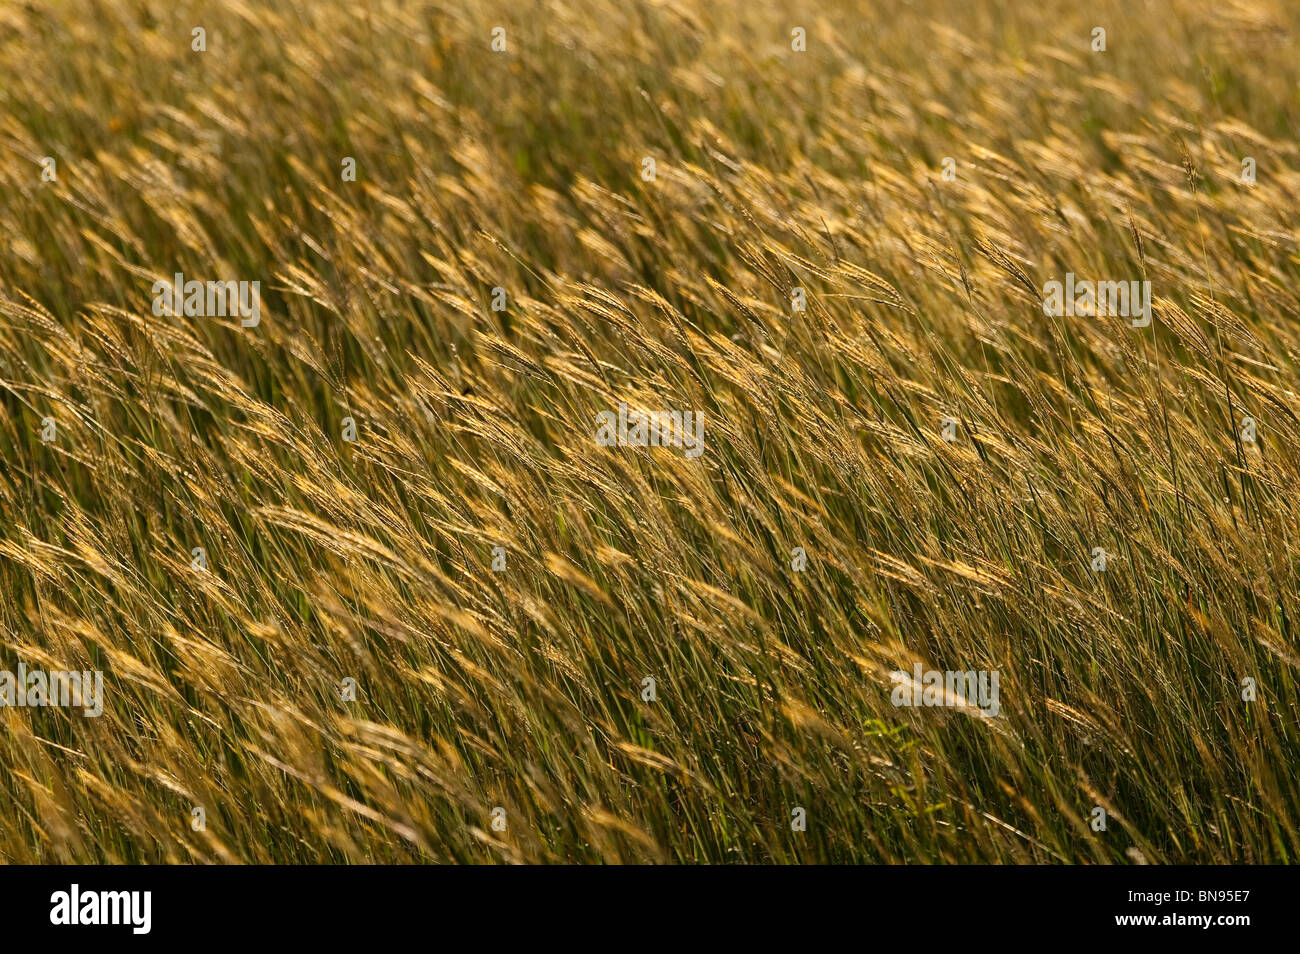 Grassy fields in the hills of Cocle province, Republic of Panama. Stock Photo